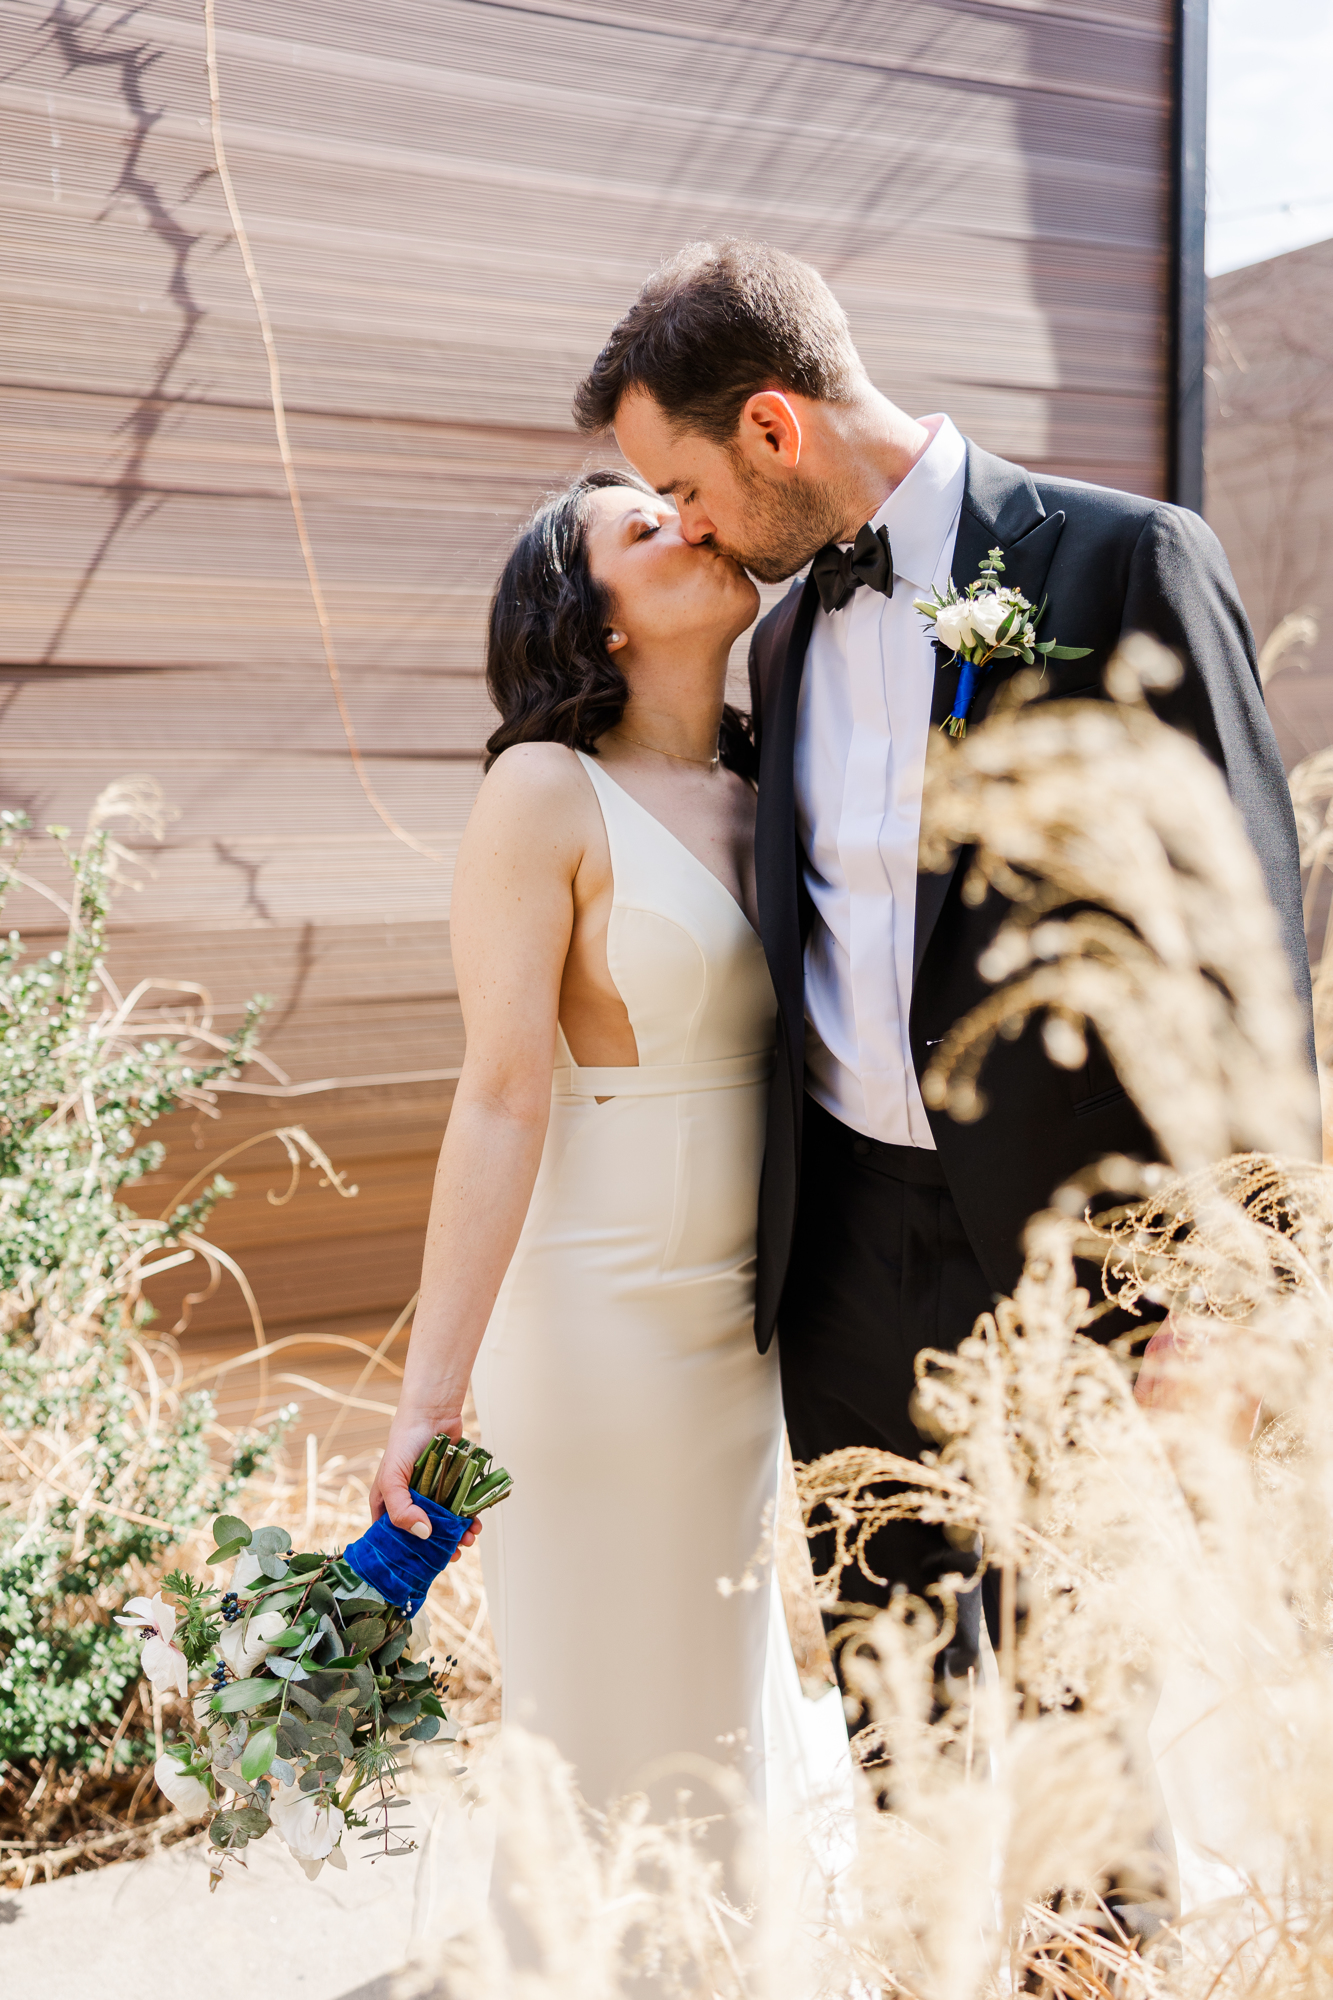 Breathtaking Spring Wedding Photos at The Green Building in Brooklyn NY